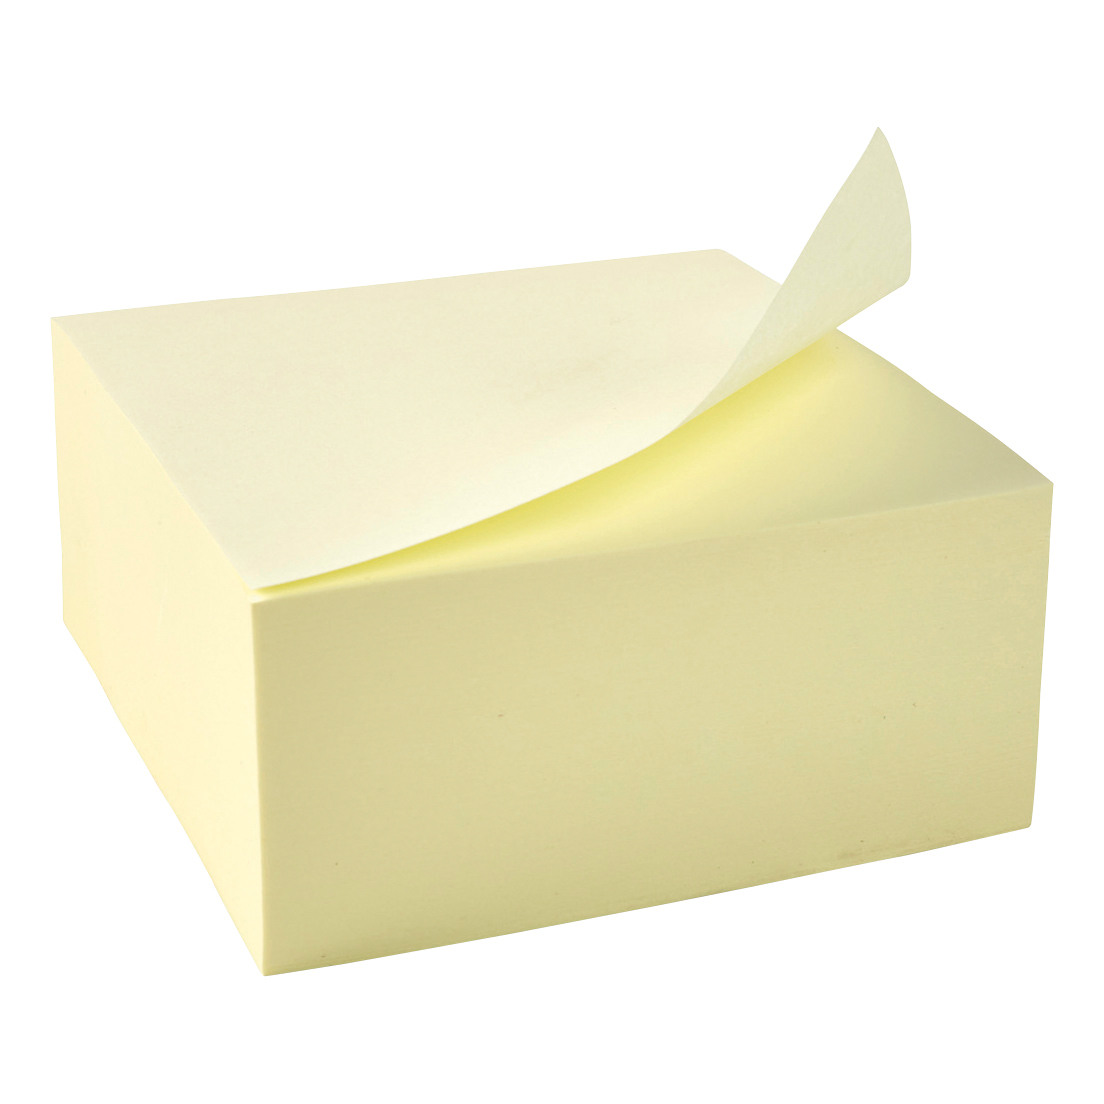 5 Star Office Re-Move Notes Cube Pad of 320 Sheets 76x76mm Yellow